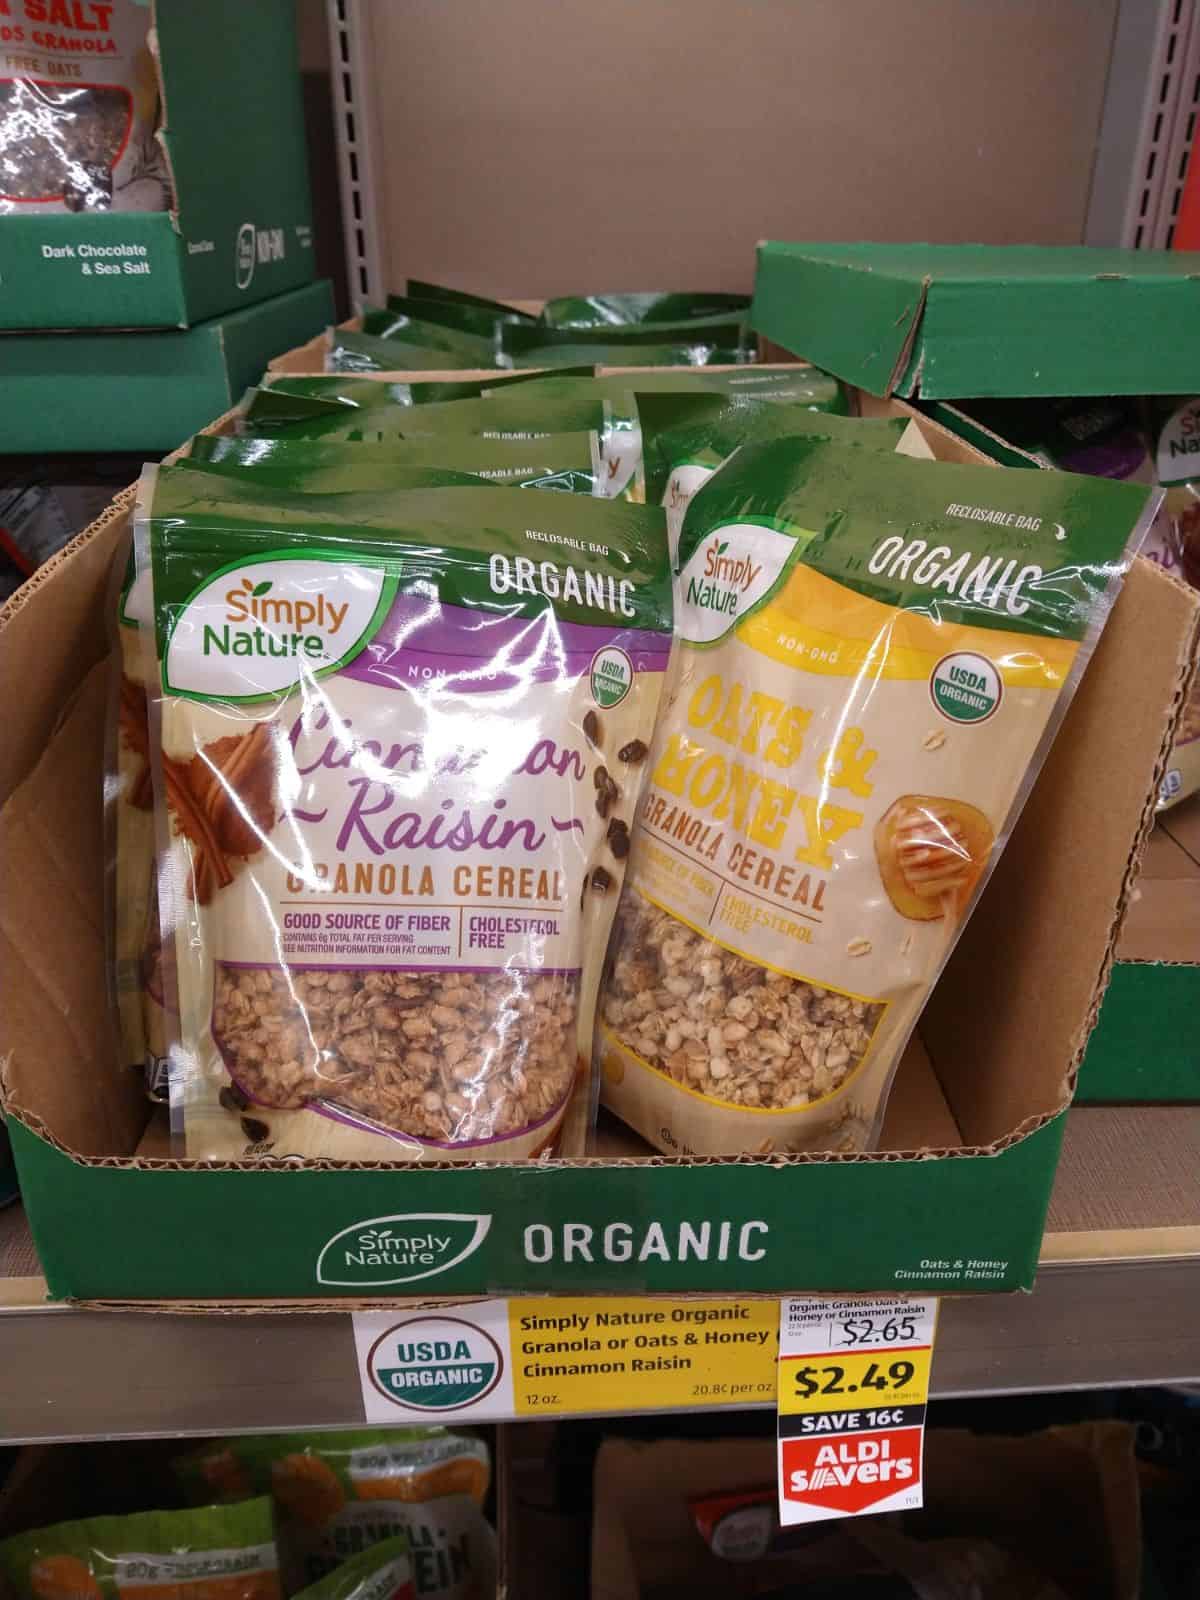 Bags of Simply Nature Cinnamon Raisin and Oats & Hooey granola.on display at ALDI.